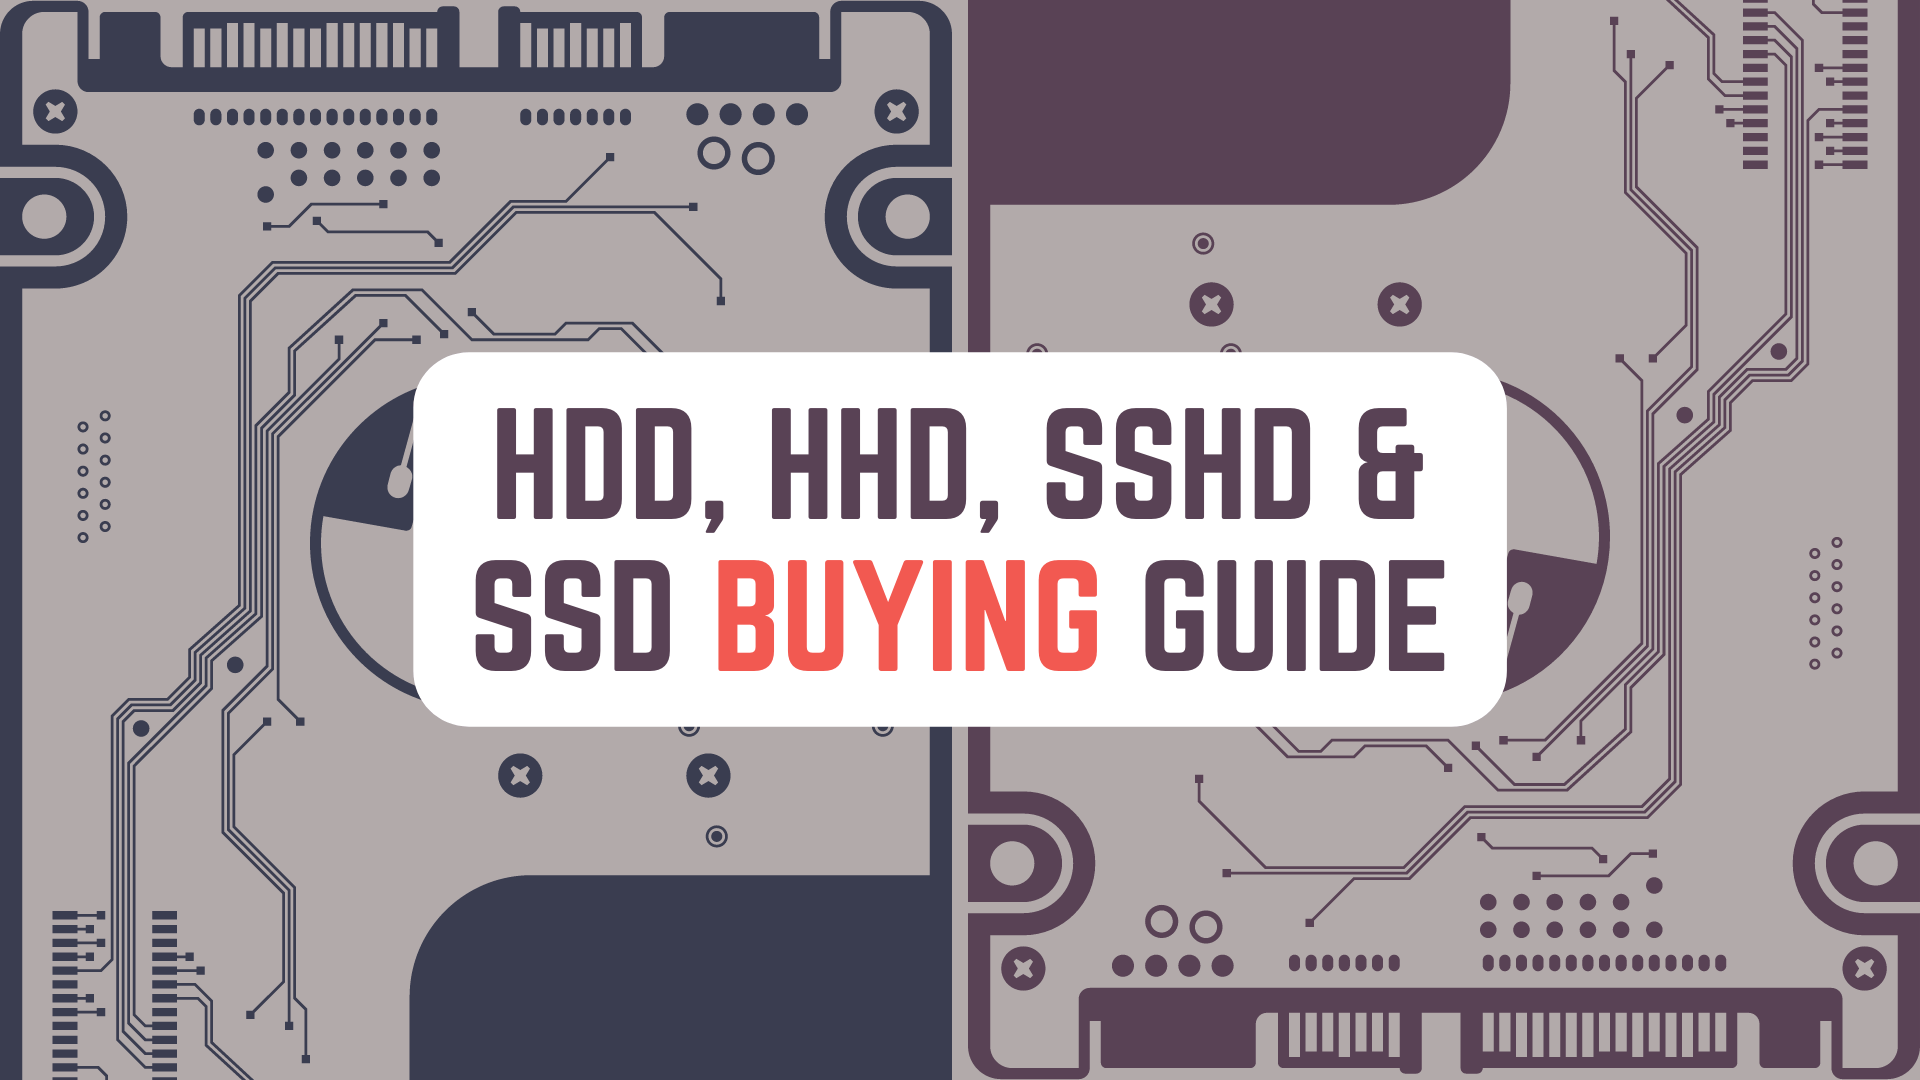 SSD, HDD, HHD and SSHD Recommendations & Buying Guide - Featured Image